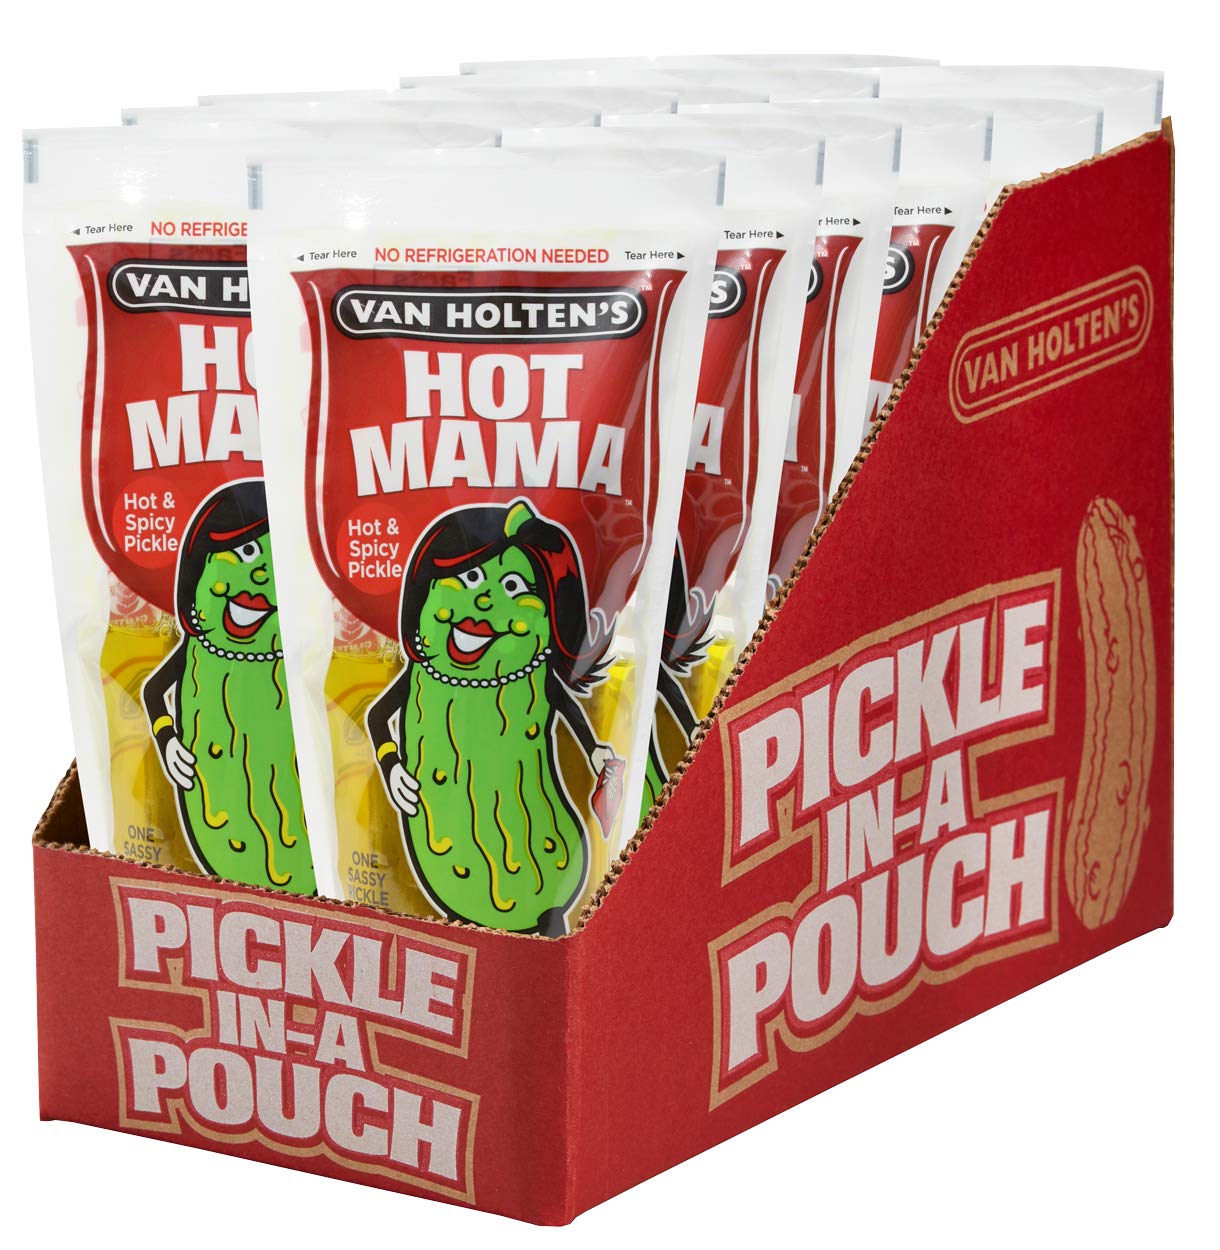 Van Holten's Hot Mama Hot & Spicy Pickle – So Sweet Canada